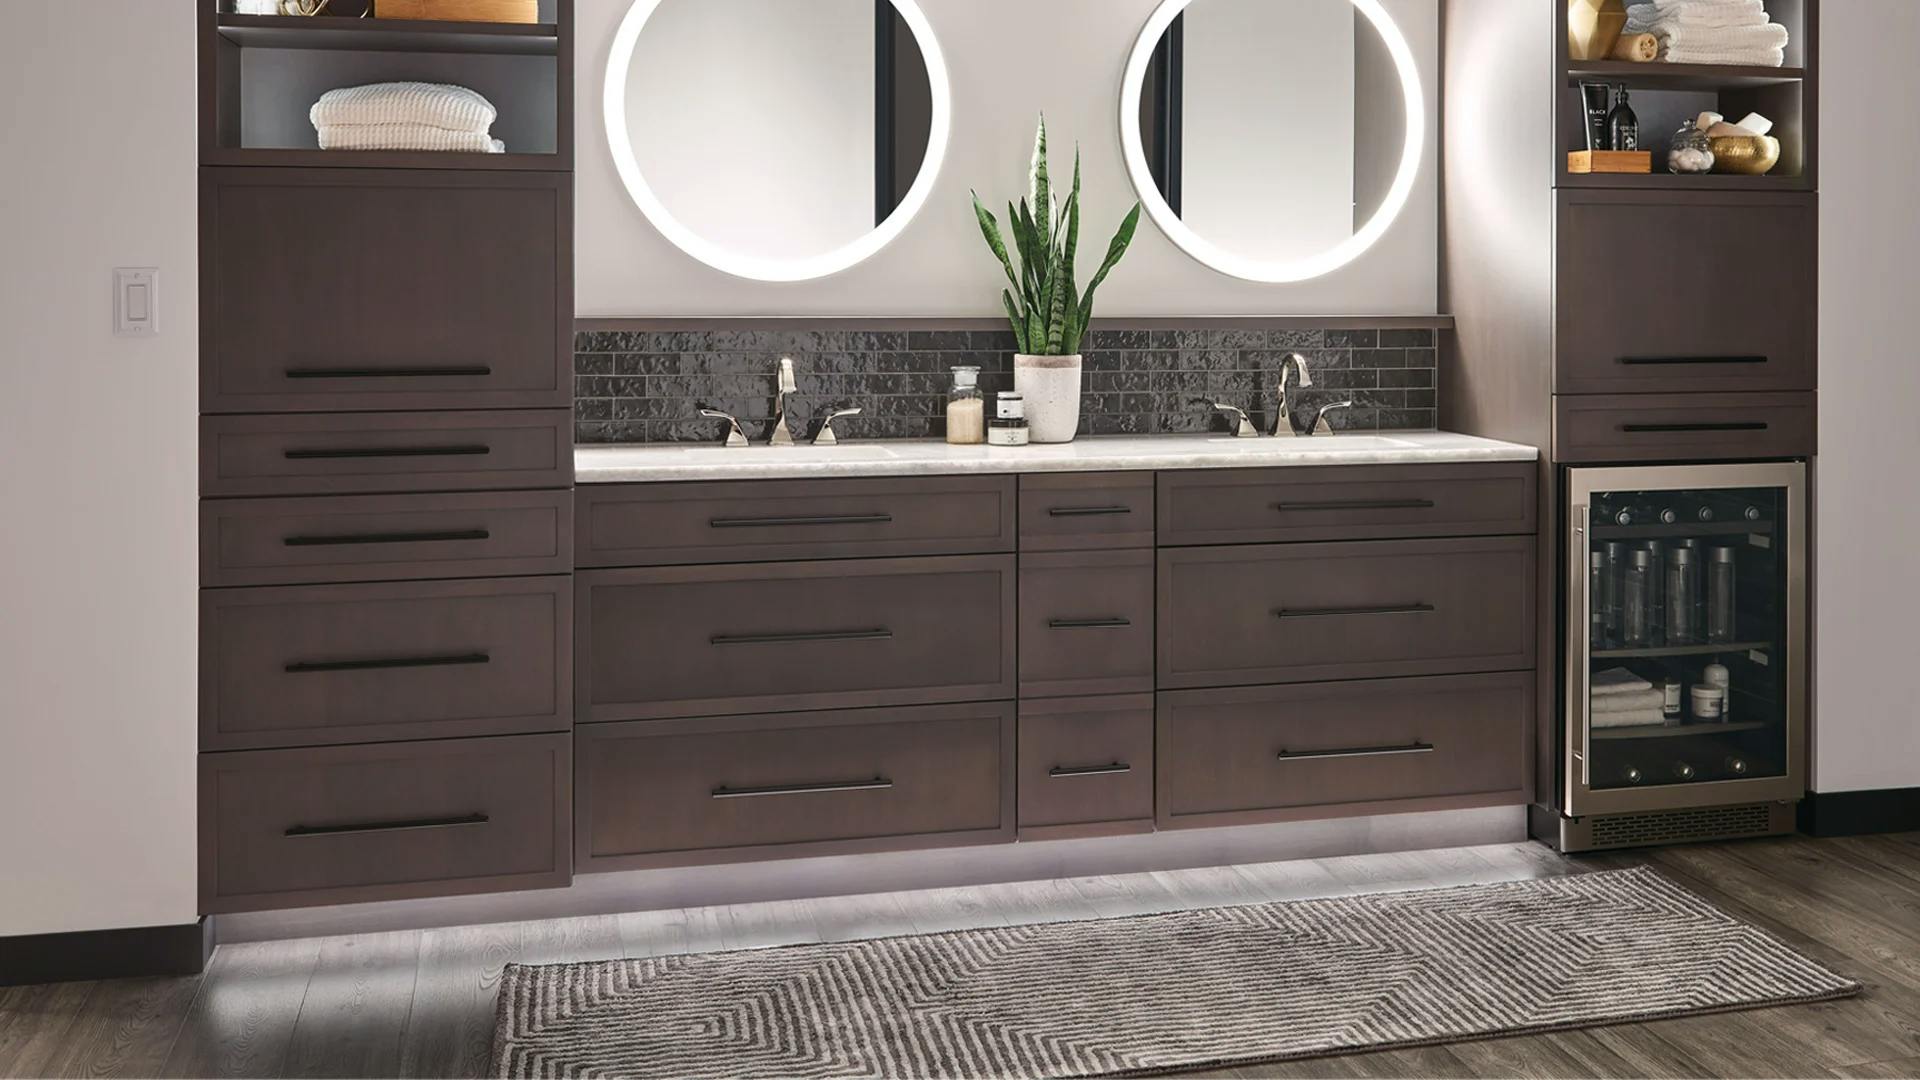 Bathroom with two round mirrors and two sinks displaying toe kick lights under the counter.